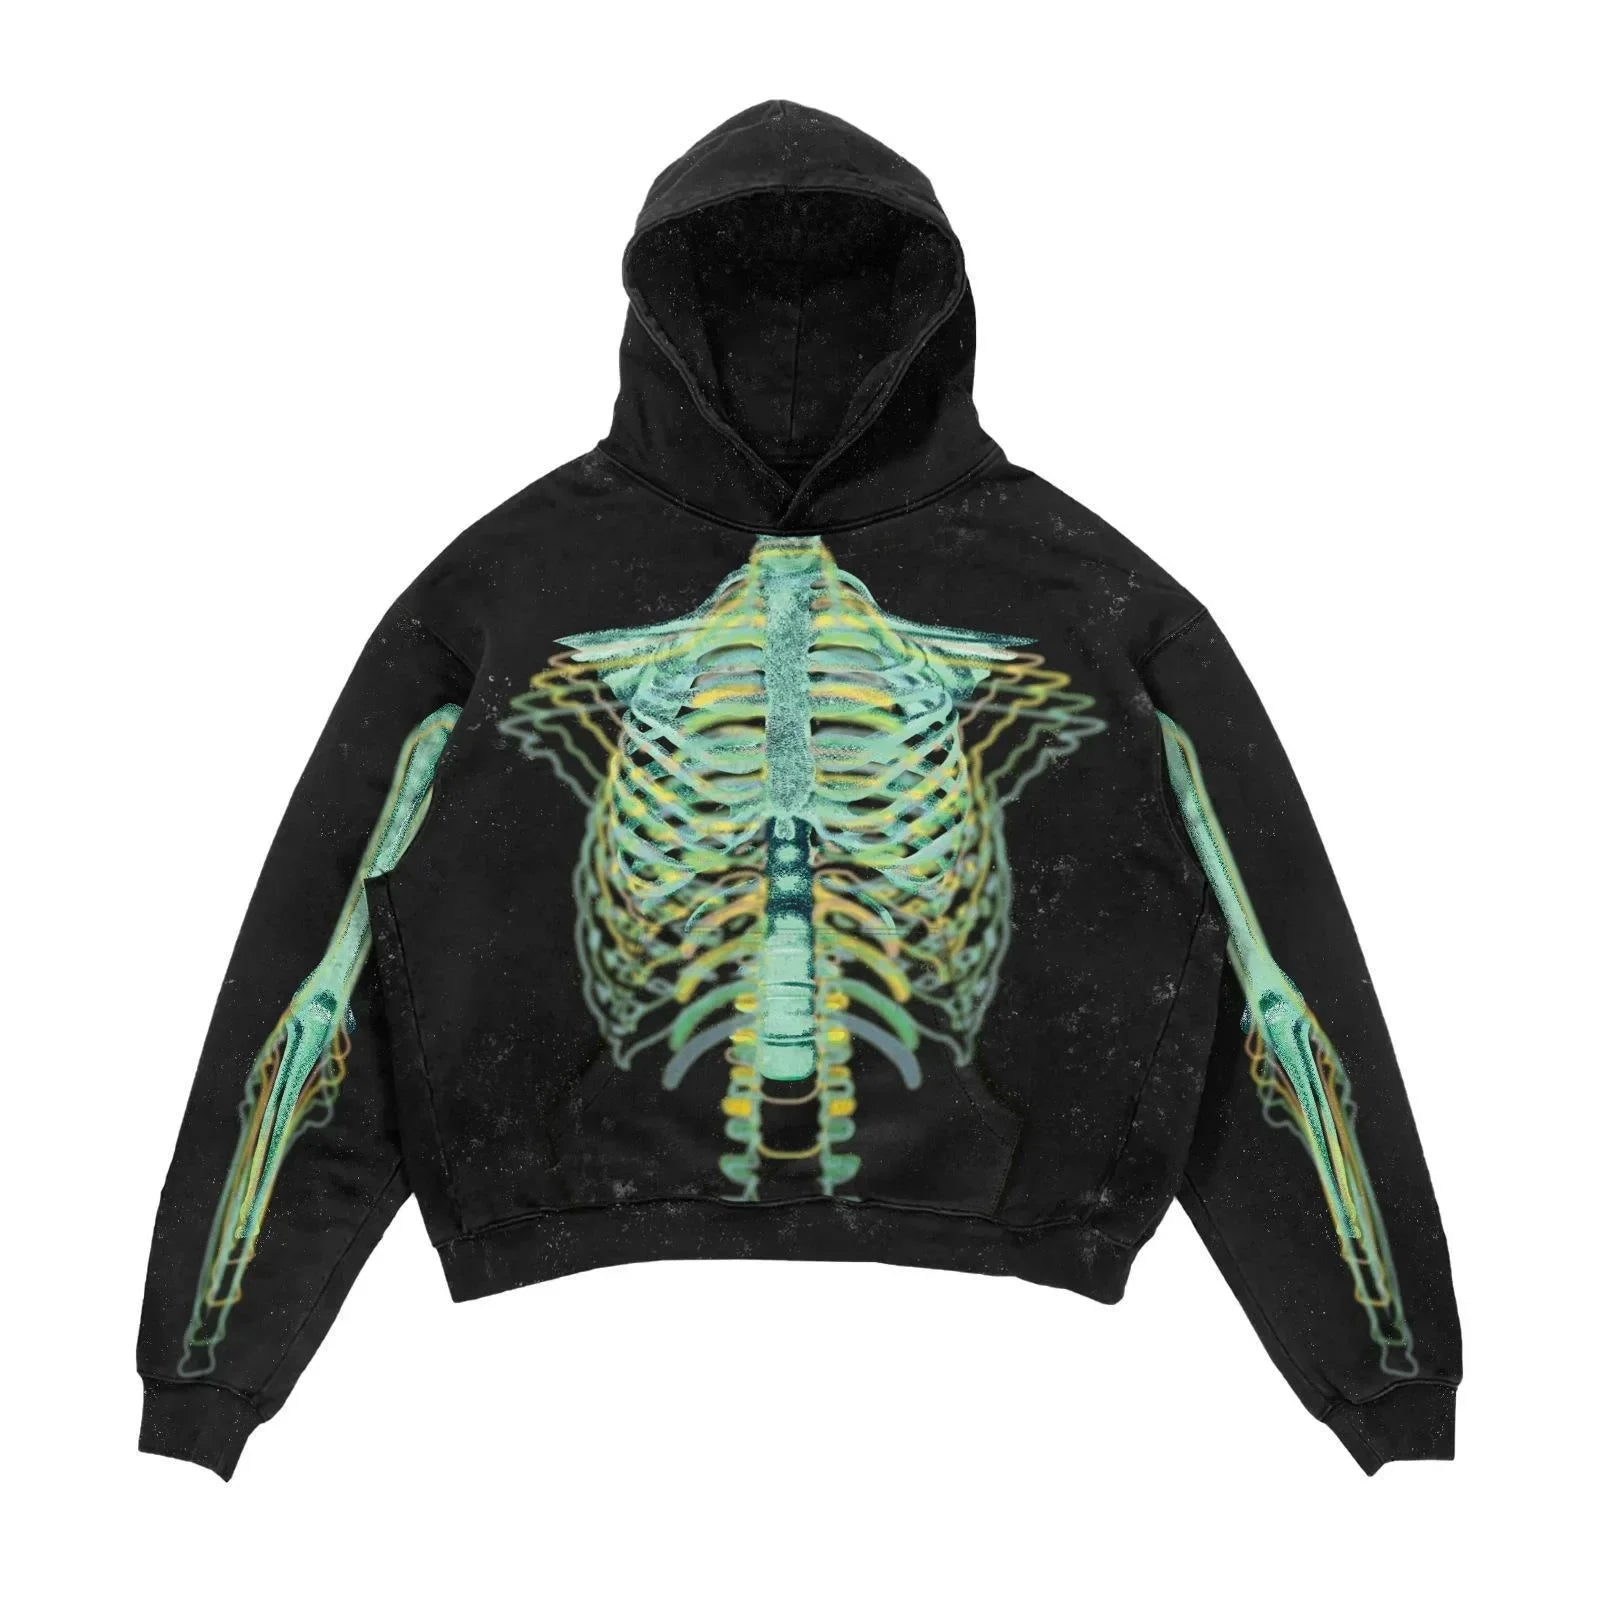 Maramalive™ Explosions Printed Skull Y2K Retro Hooded Sweater Coat Street Style Gothic Casual Fashion Hooded Sweater Men's Female featuring a punk-style design of a green skeleton ribcage and arms printed on the front, perfect for those into men's fashion.